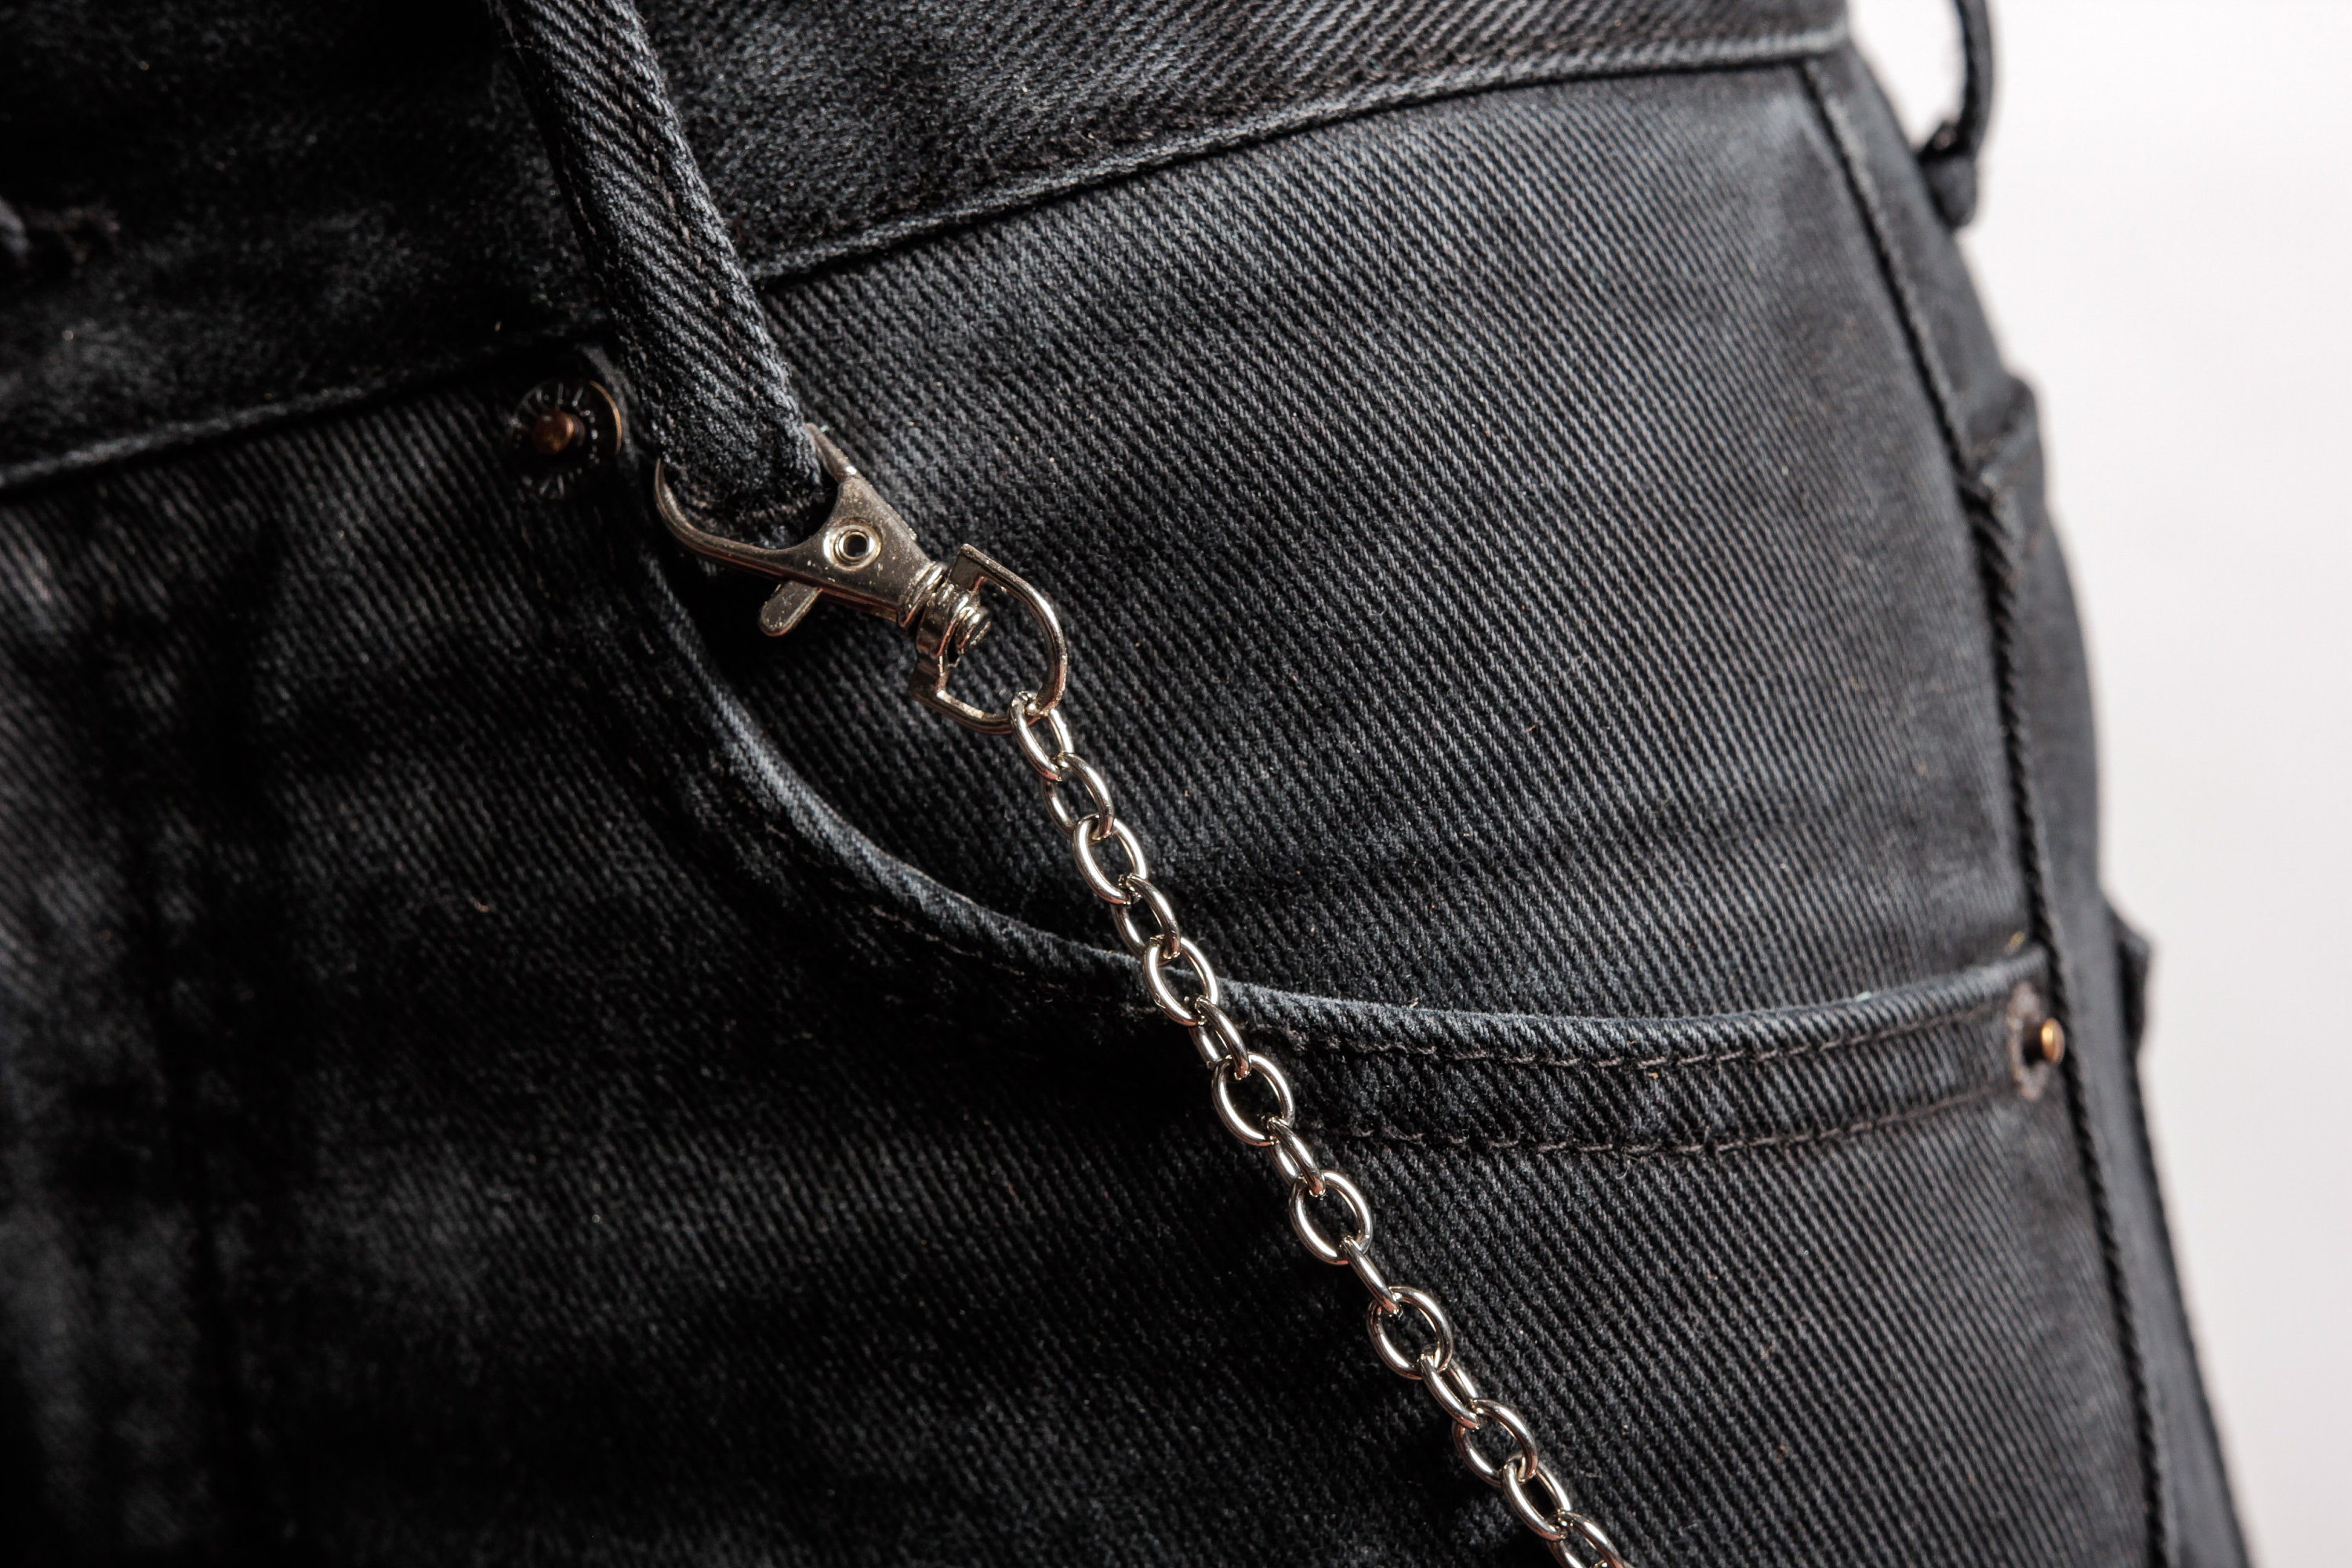 Men Pants Chain Keychain Wallet Chain for Pants Key Chain Simple